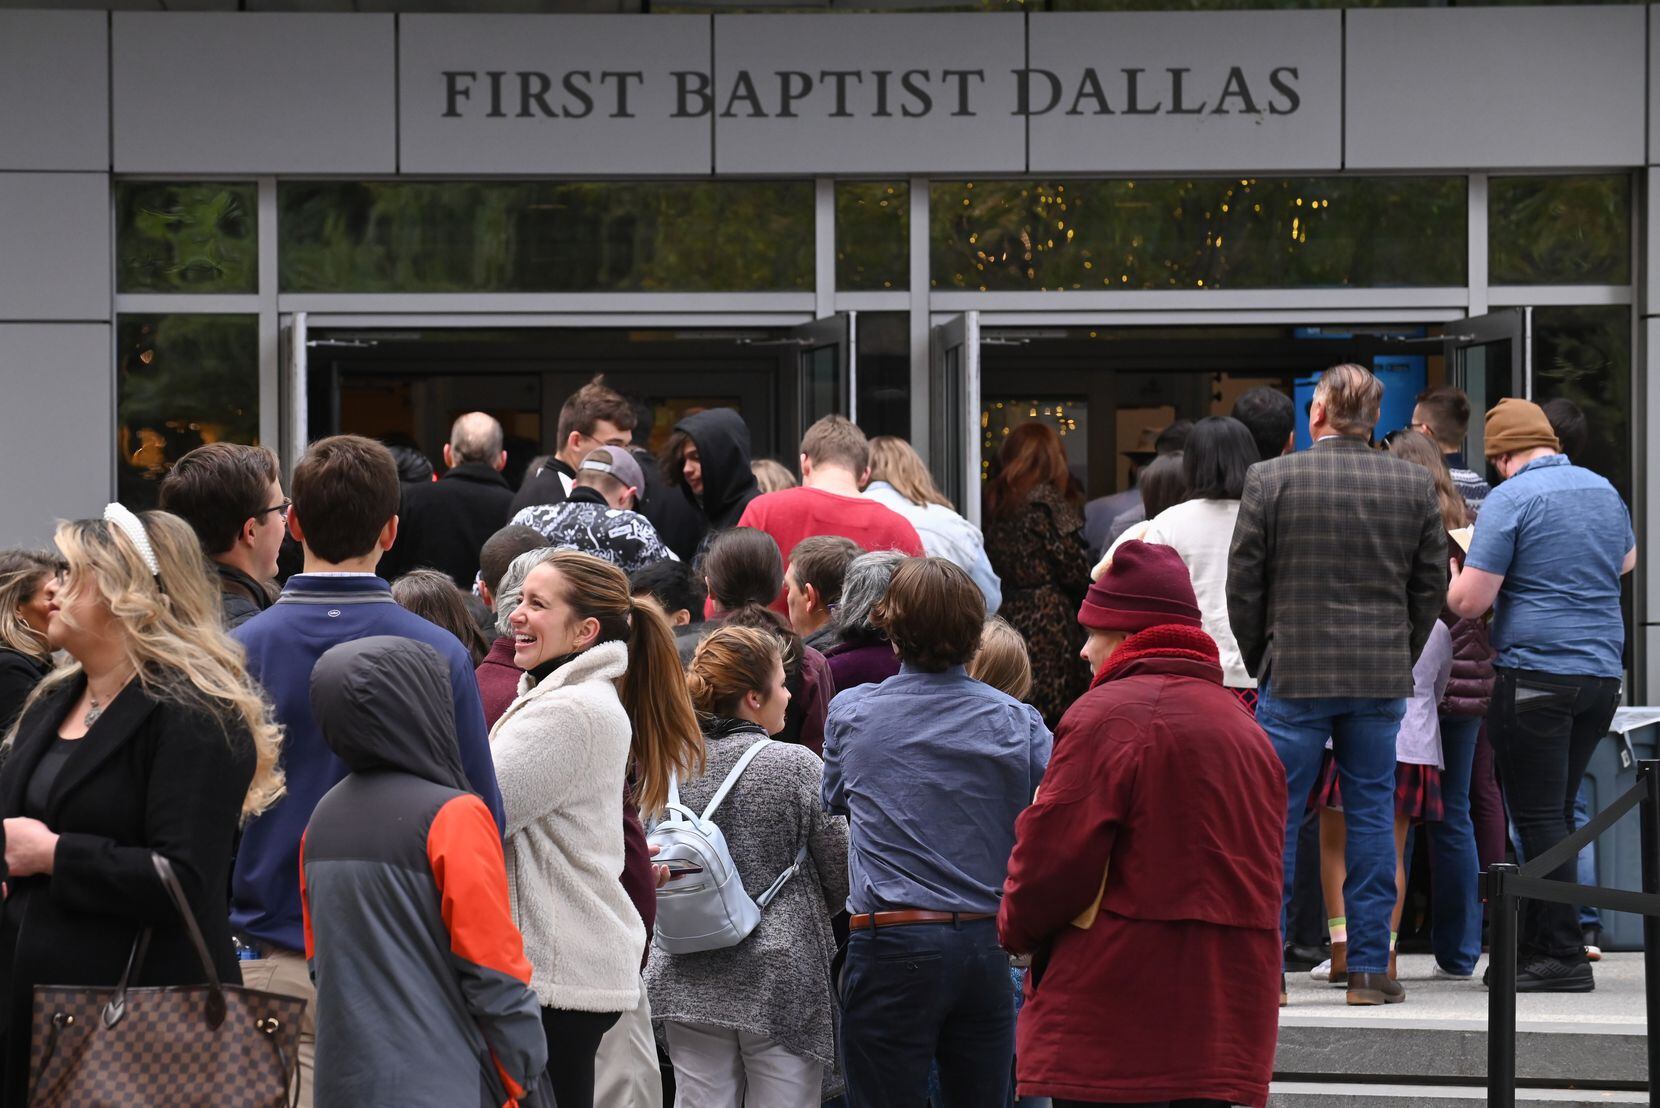 Trump supporters and church members of First Baptist Dallas wait in line for Sunday morning...